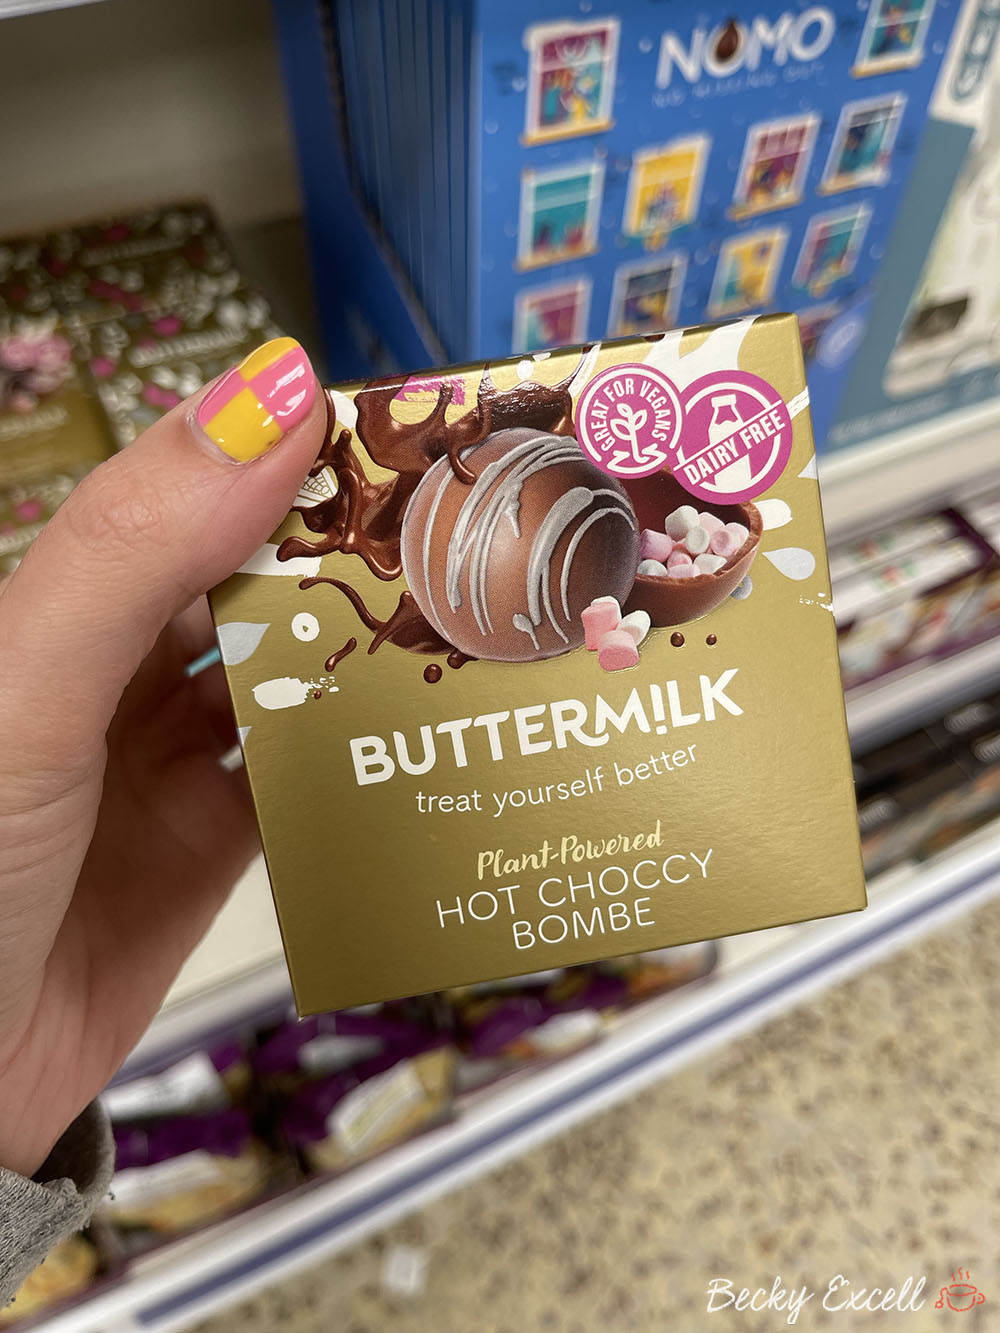 Tescos gluten-free Christmas products 2021: Buttermilk Hot Chocolate Bombe